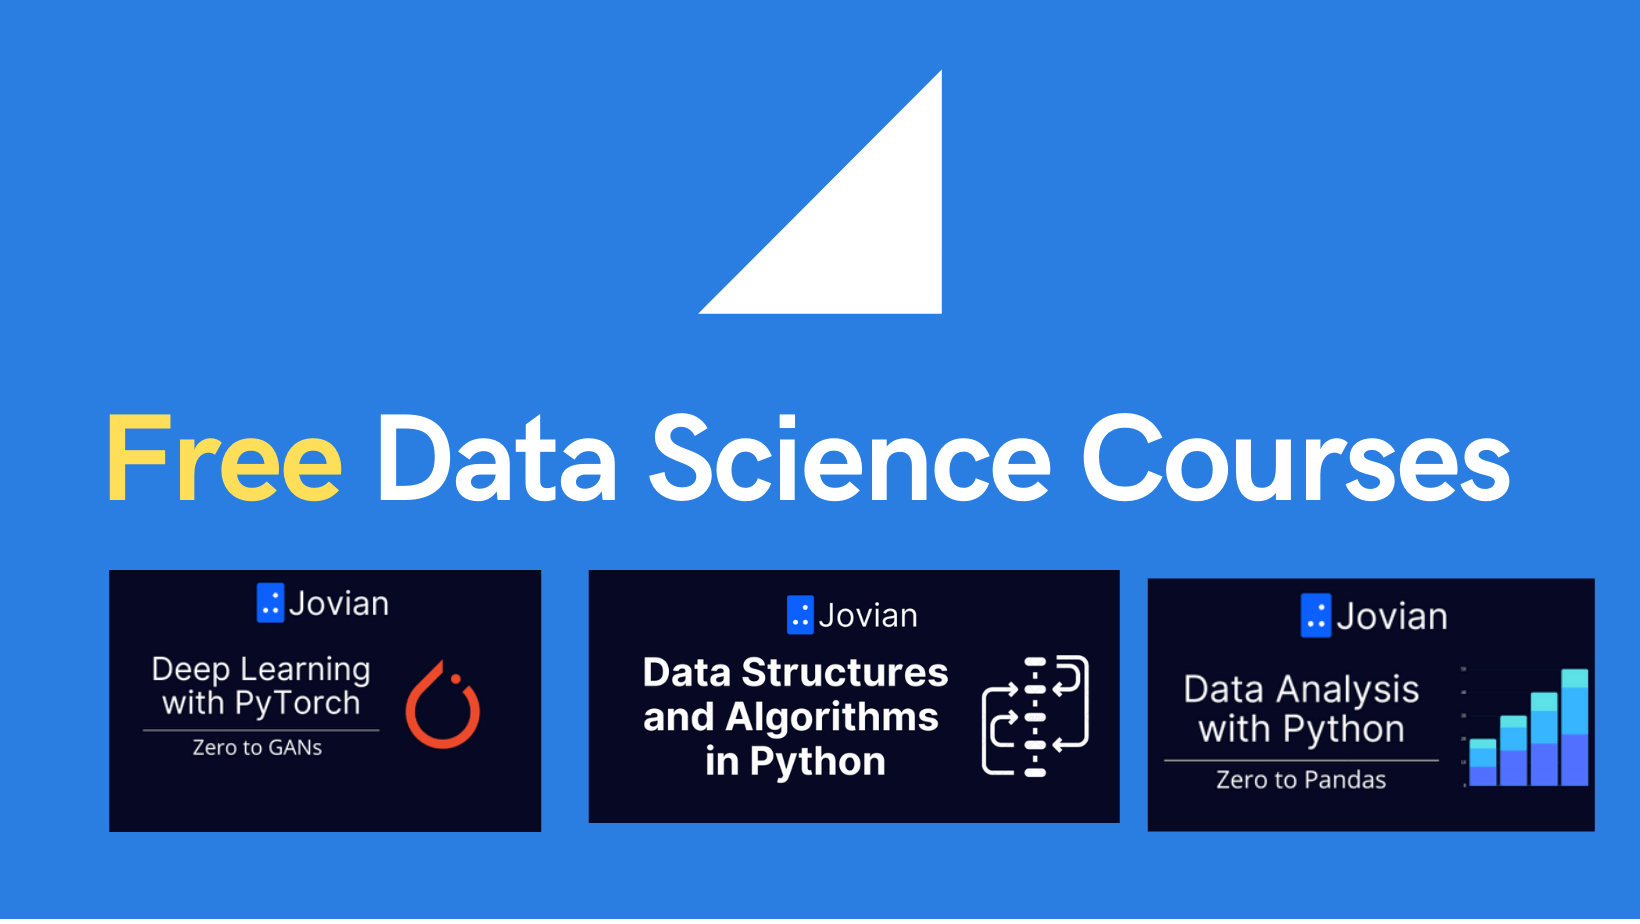 Data Science courses with free certificate